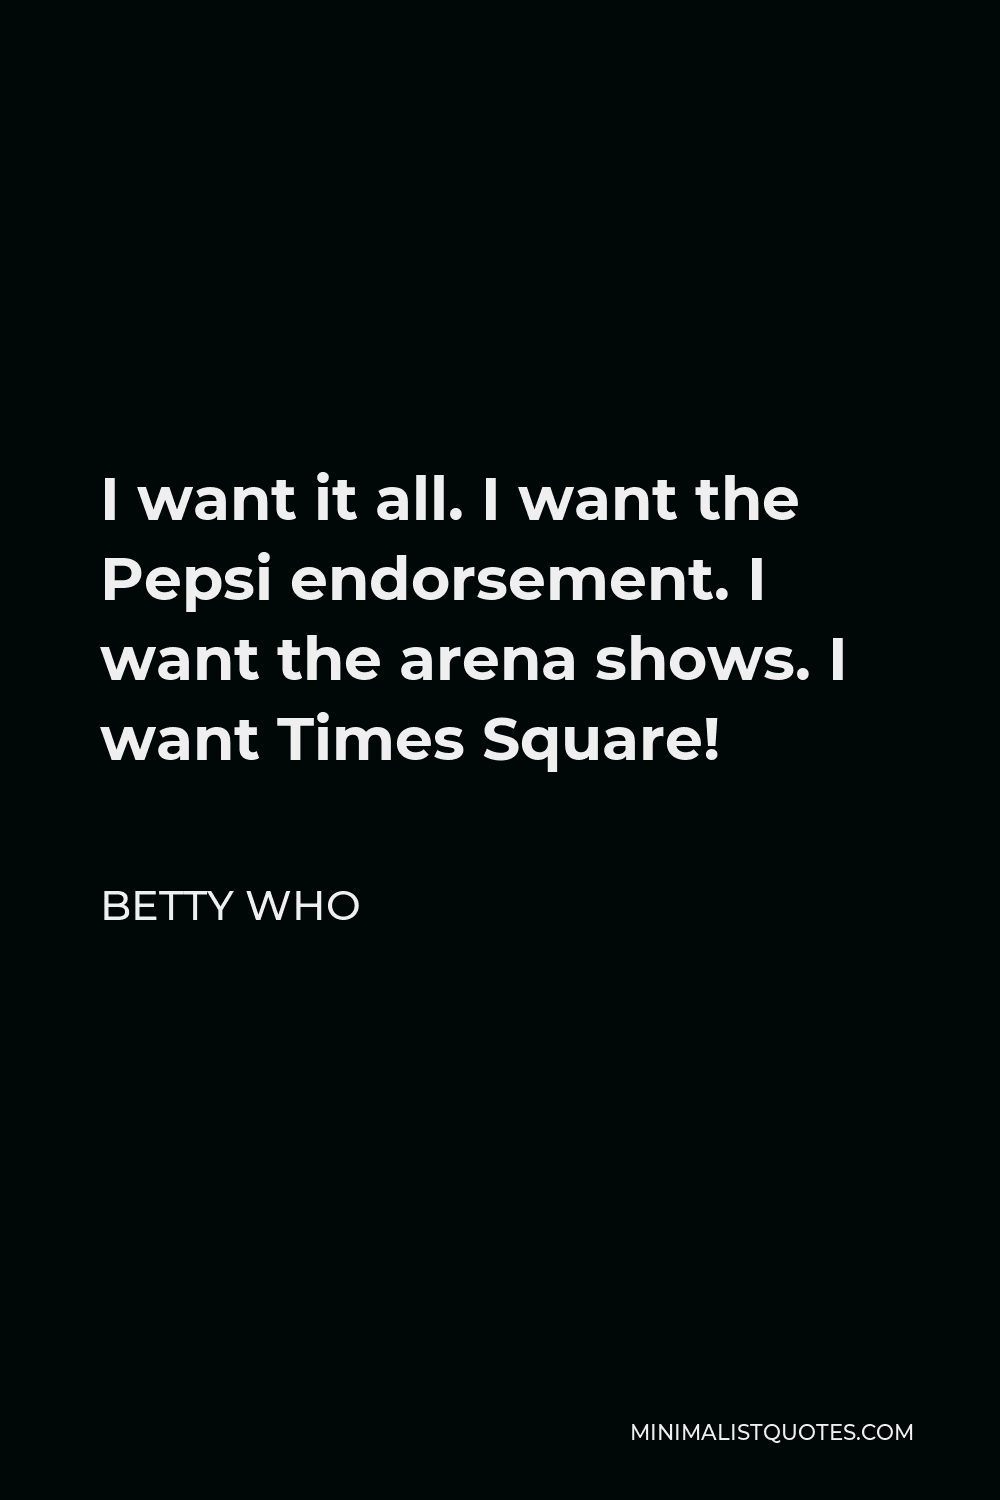 Betty Who Quote - I want it all. I want the Pepsi endorsement. I want the arena shows. I want Times Square!